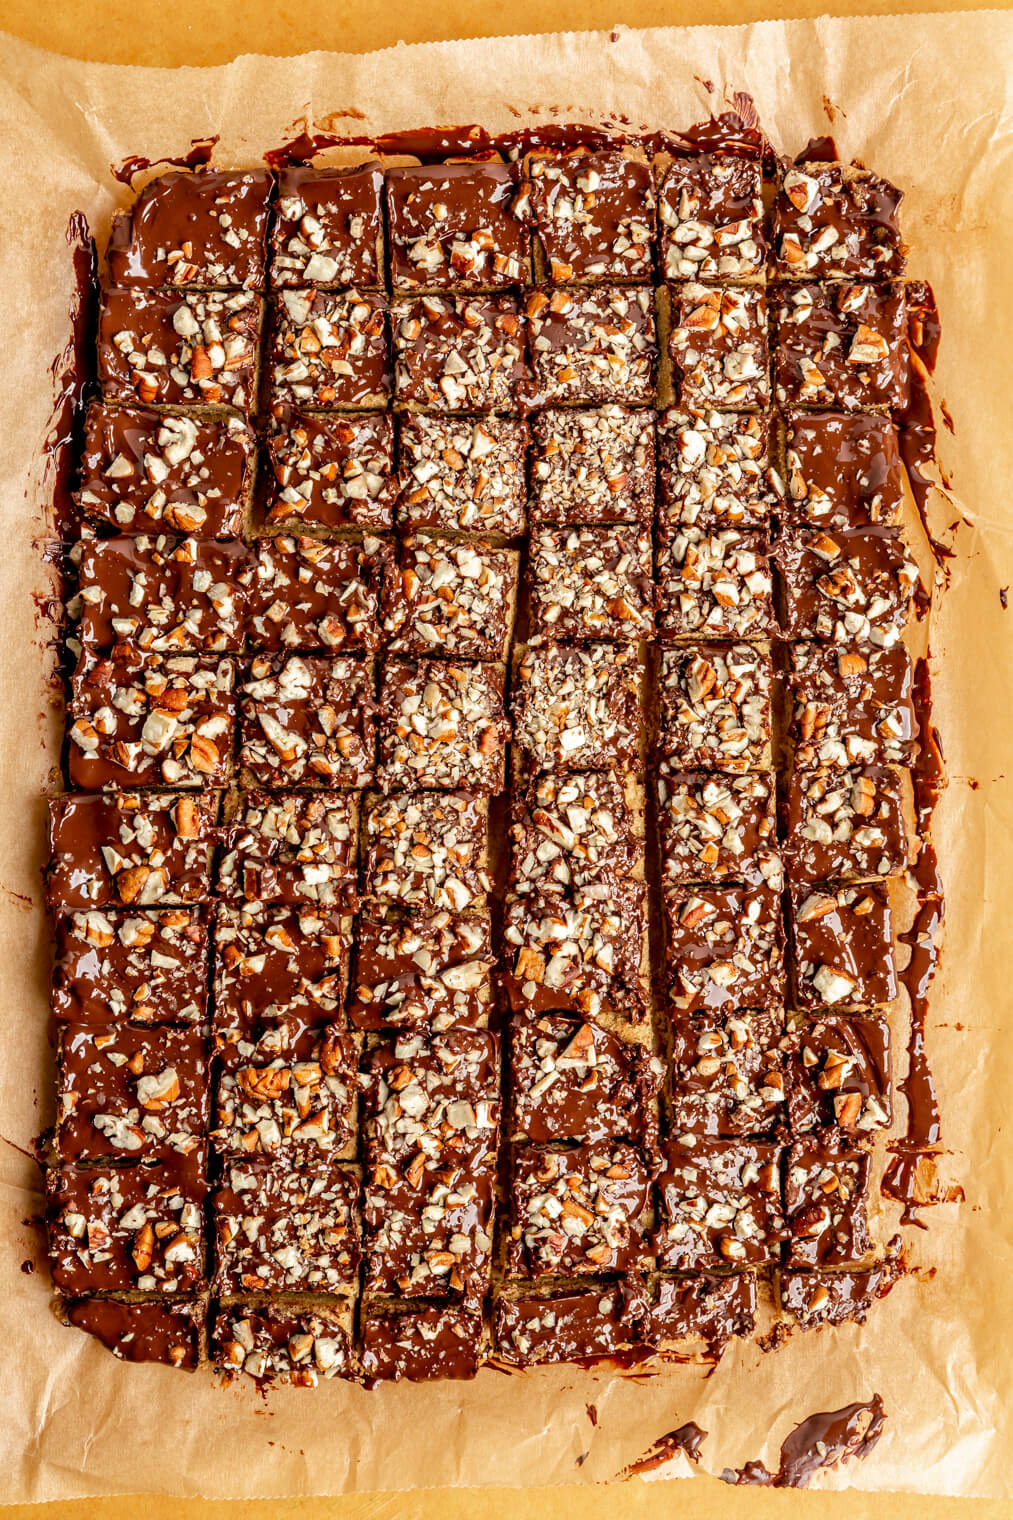 Toffee squares cut into pieces.